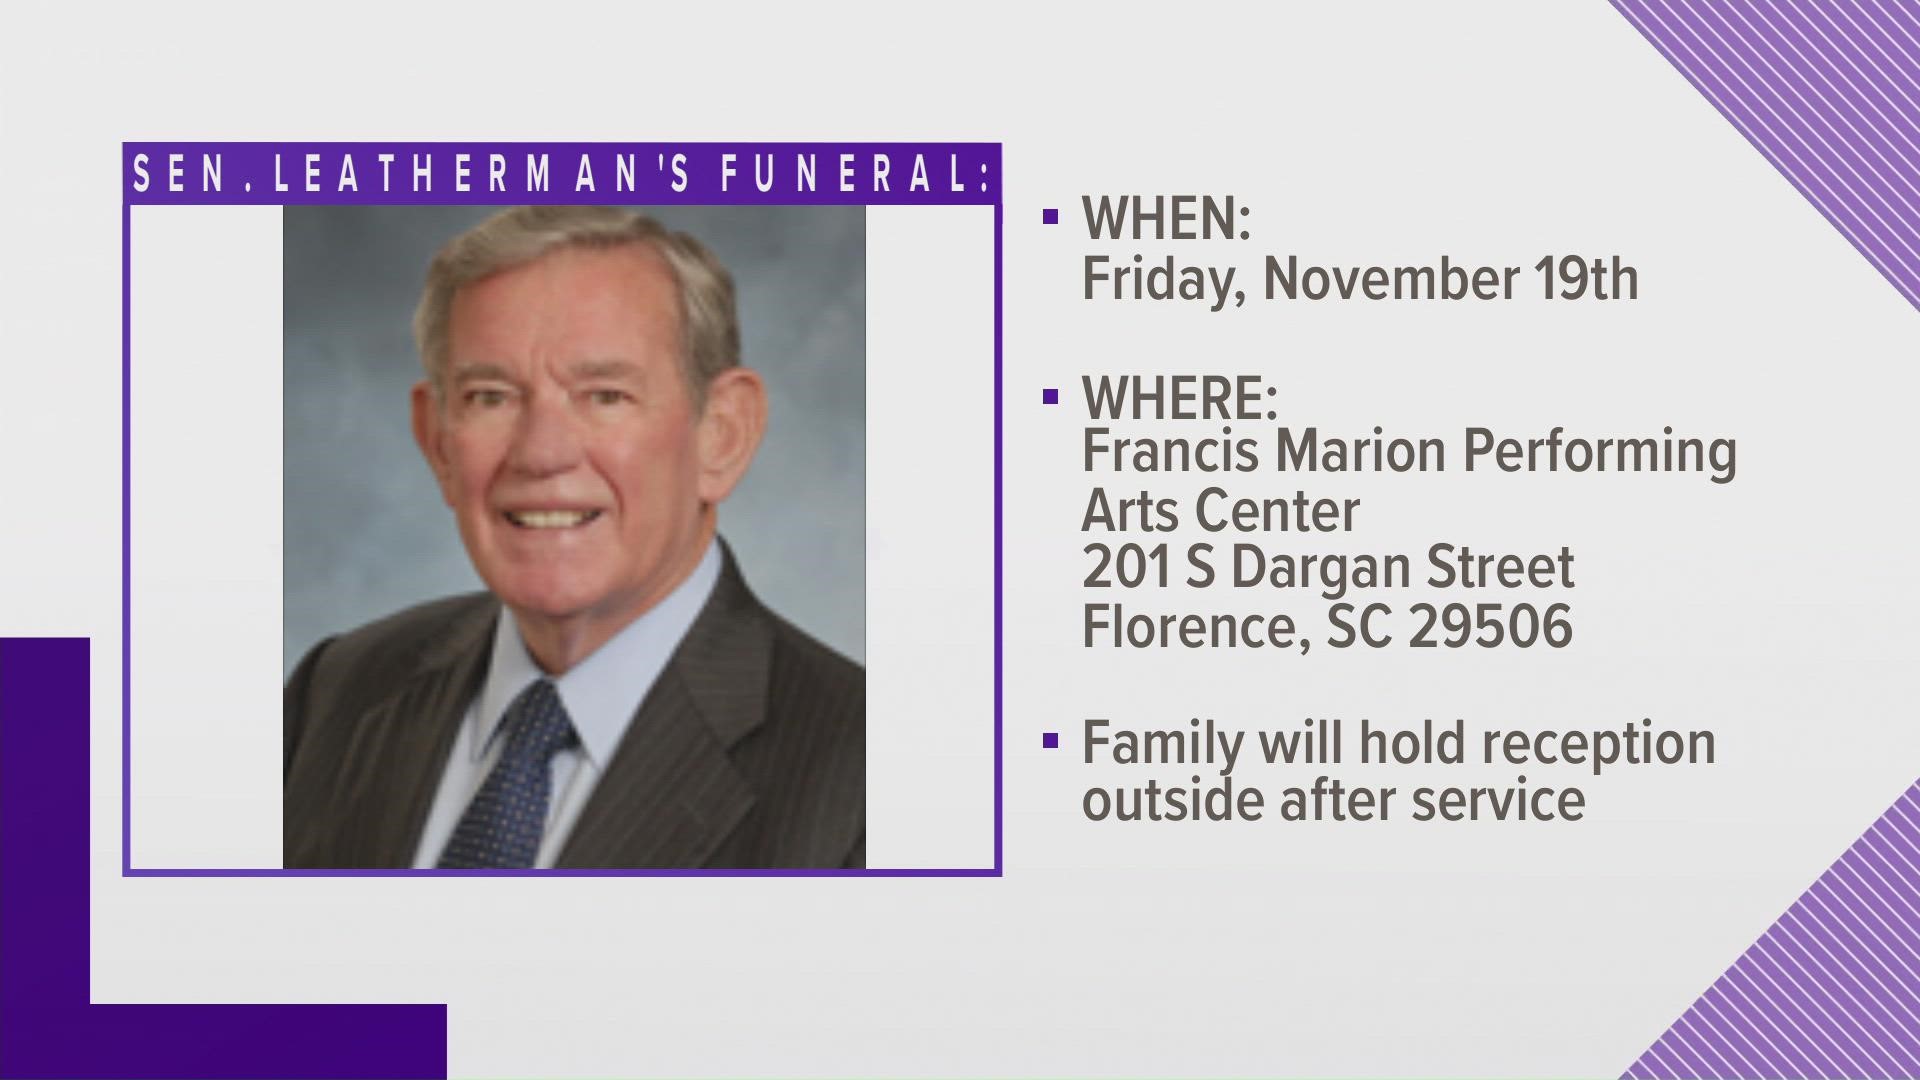 The funeral services will be held on Friday at the Francis Marion Arts center in Florence.